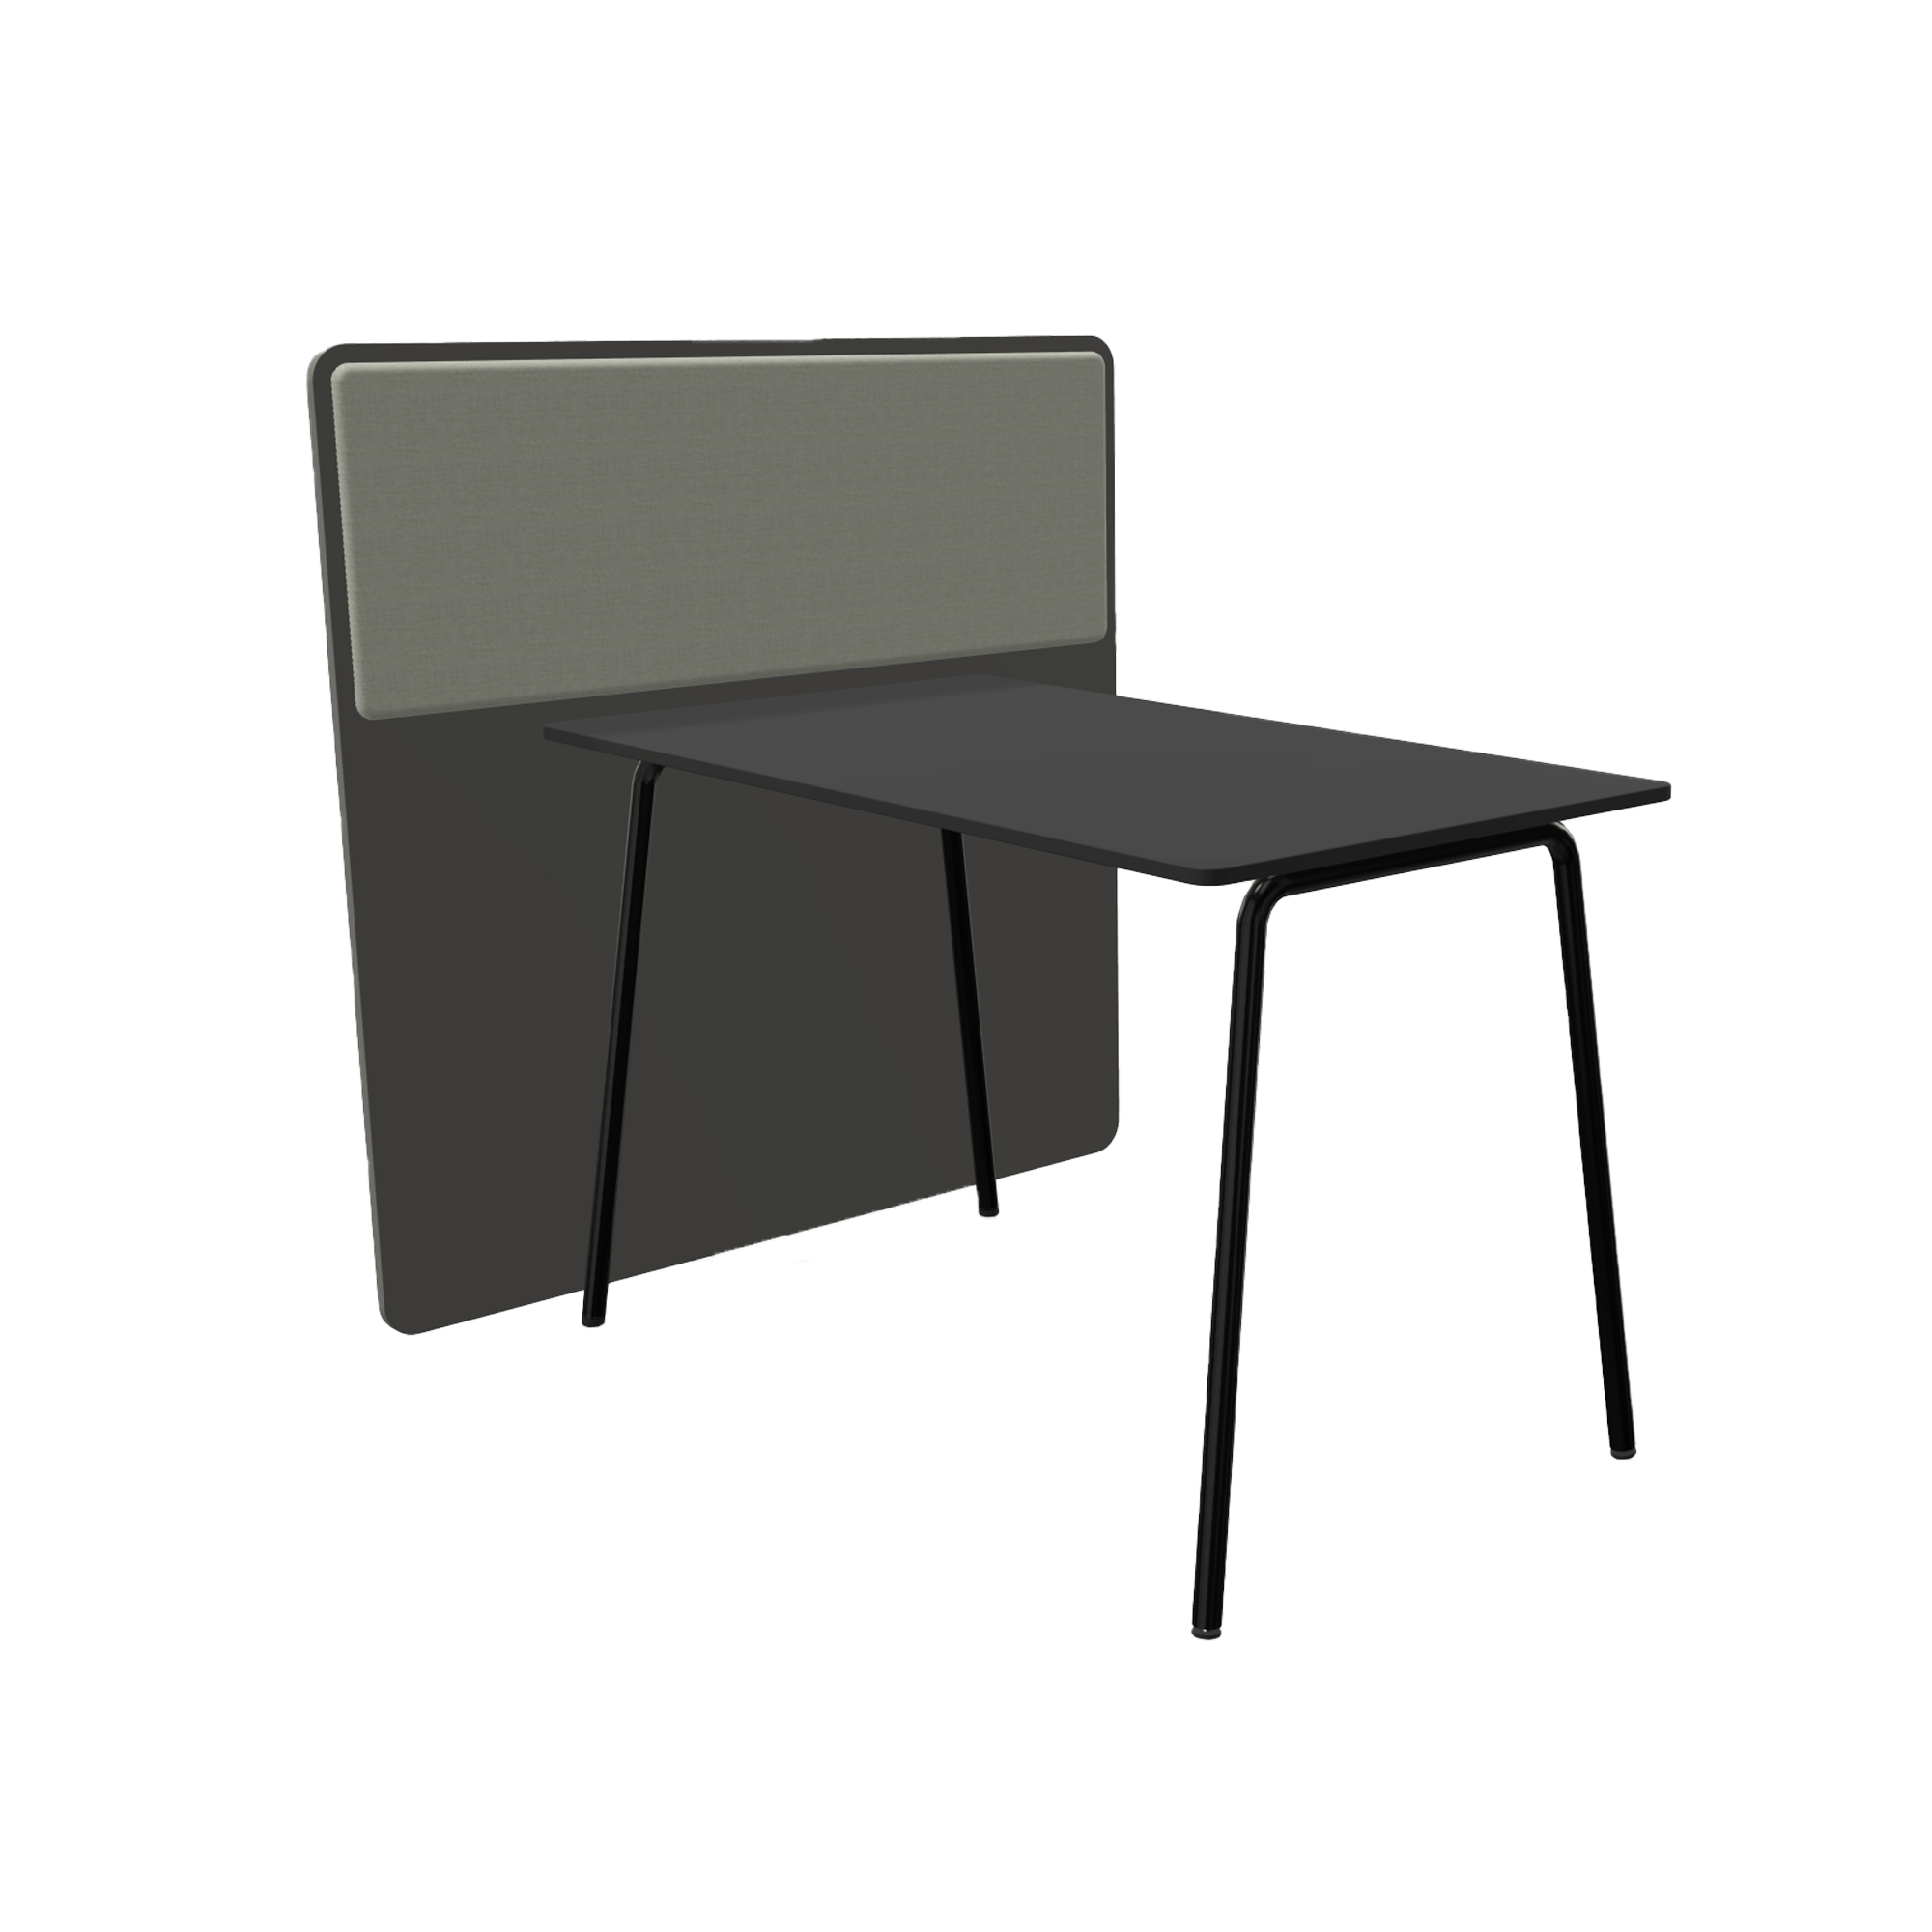 A black table with black legs and a black office screen divider attached to one side and an acoustic panel on it